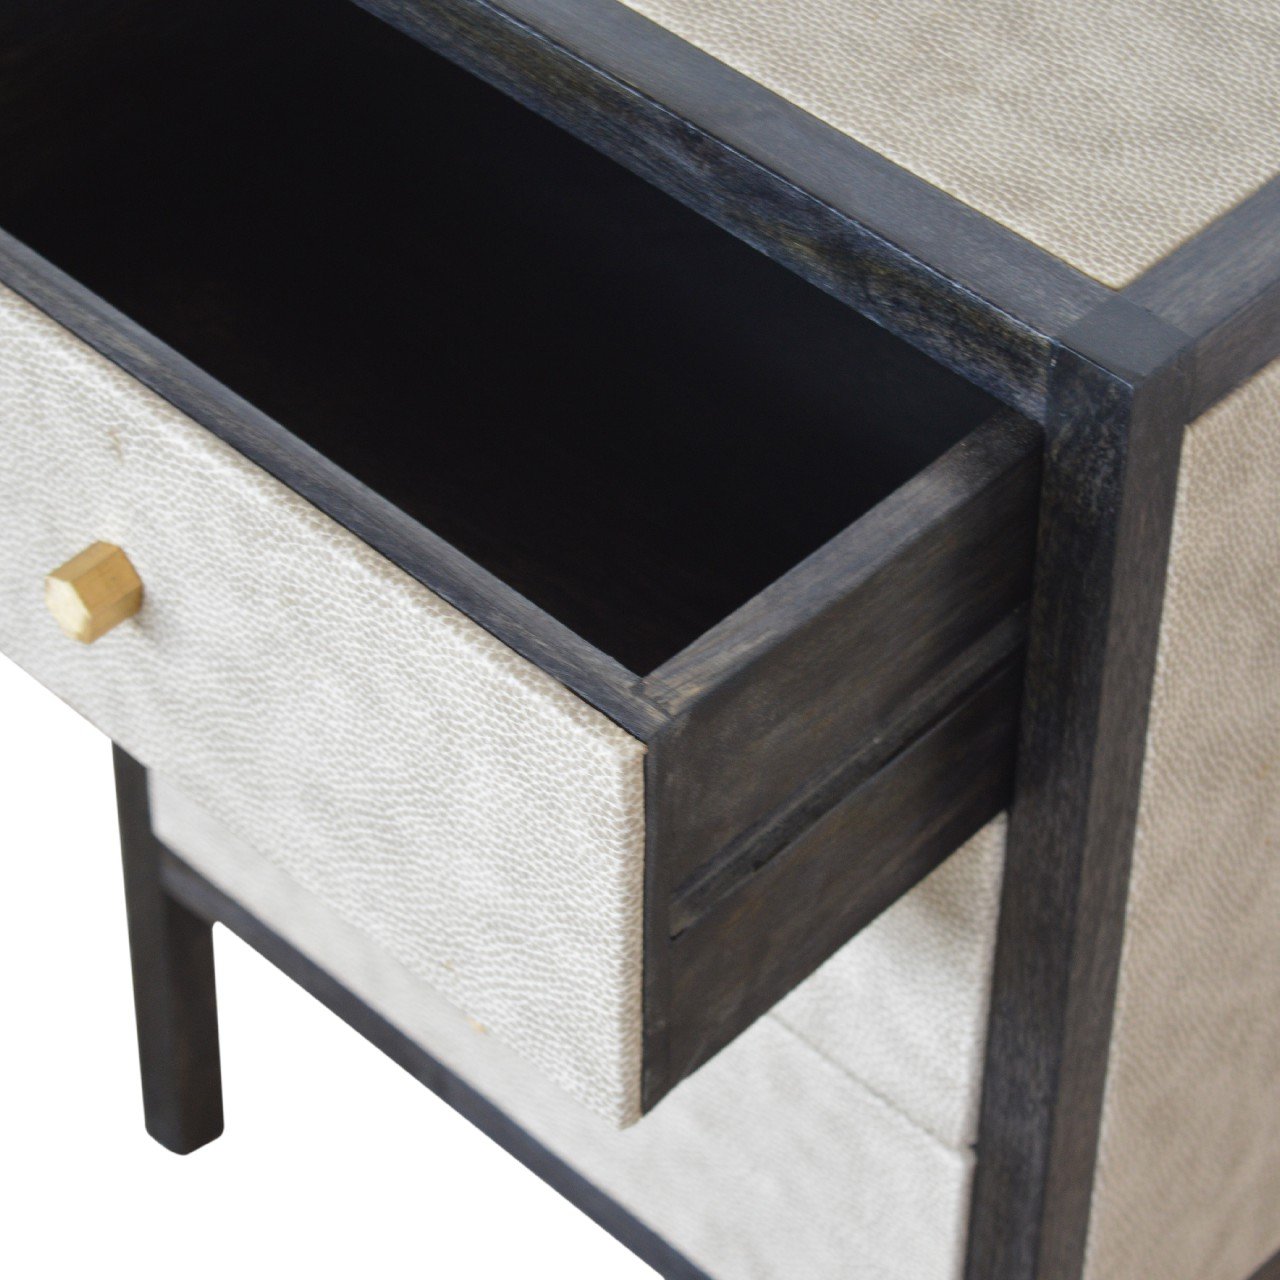 Faux Leather Bedside Cabinet